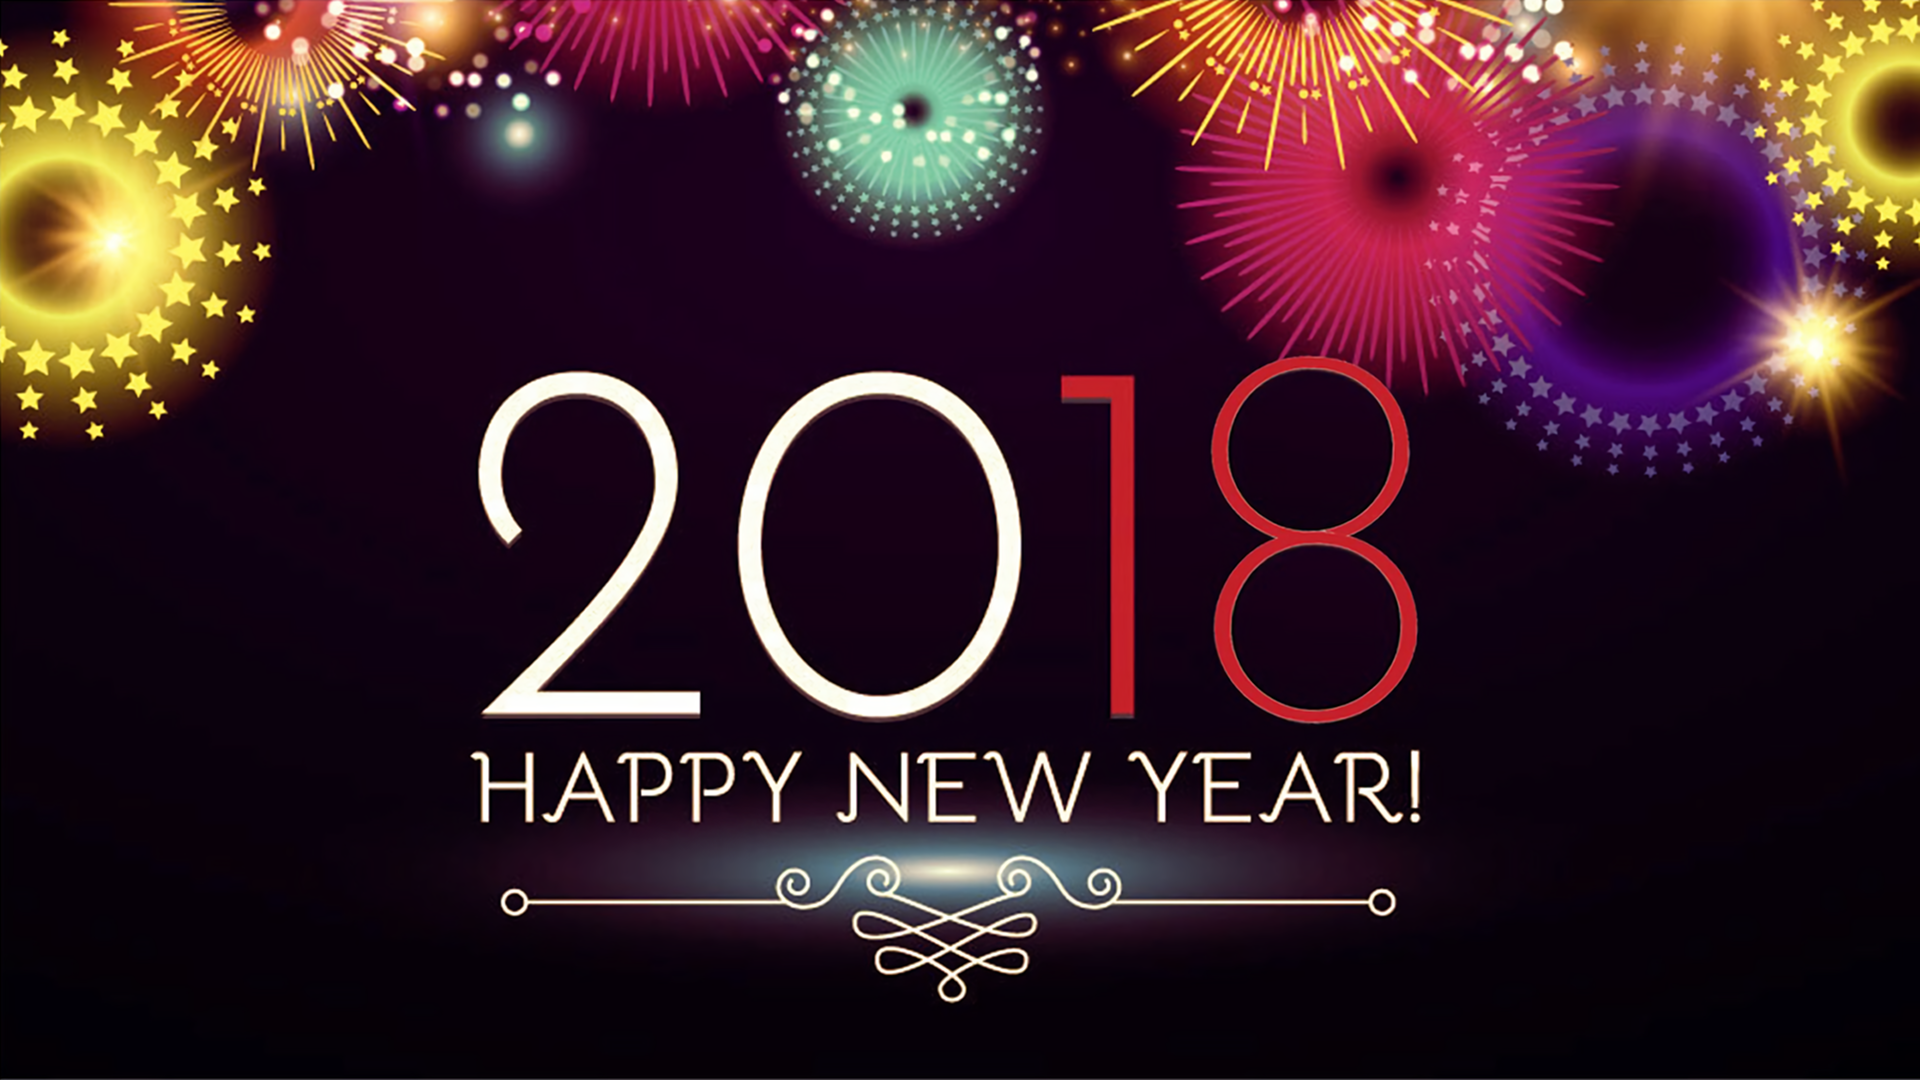 Happy new year 2018 Vector Image - 2078851 | StockUnlimited